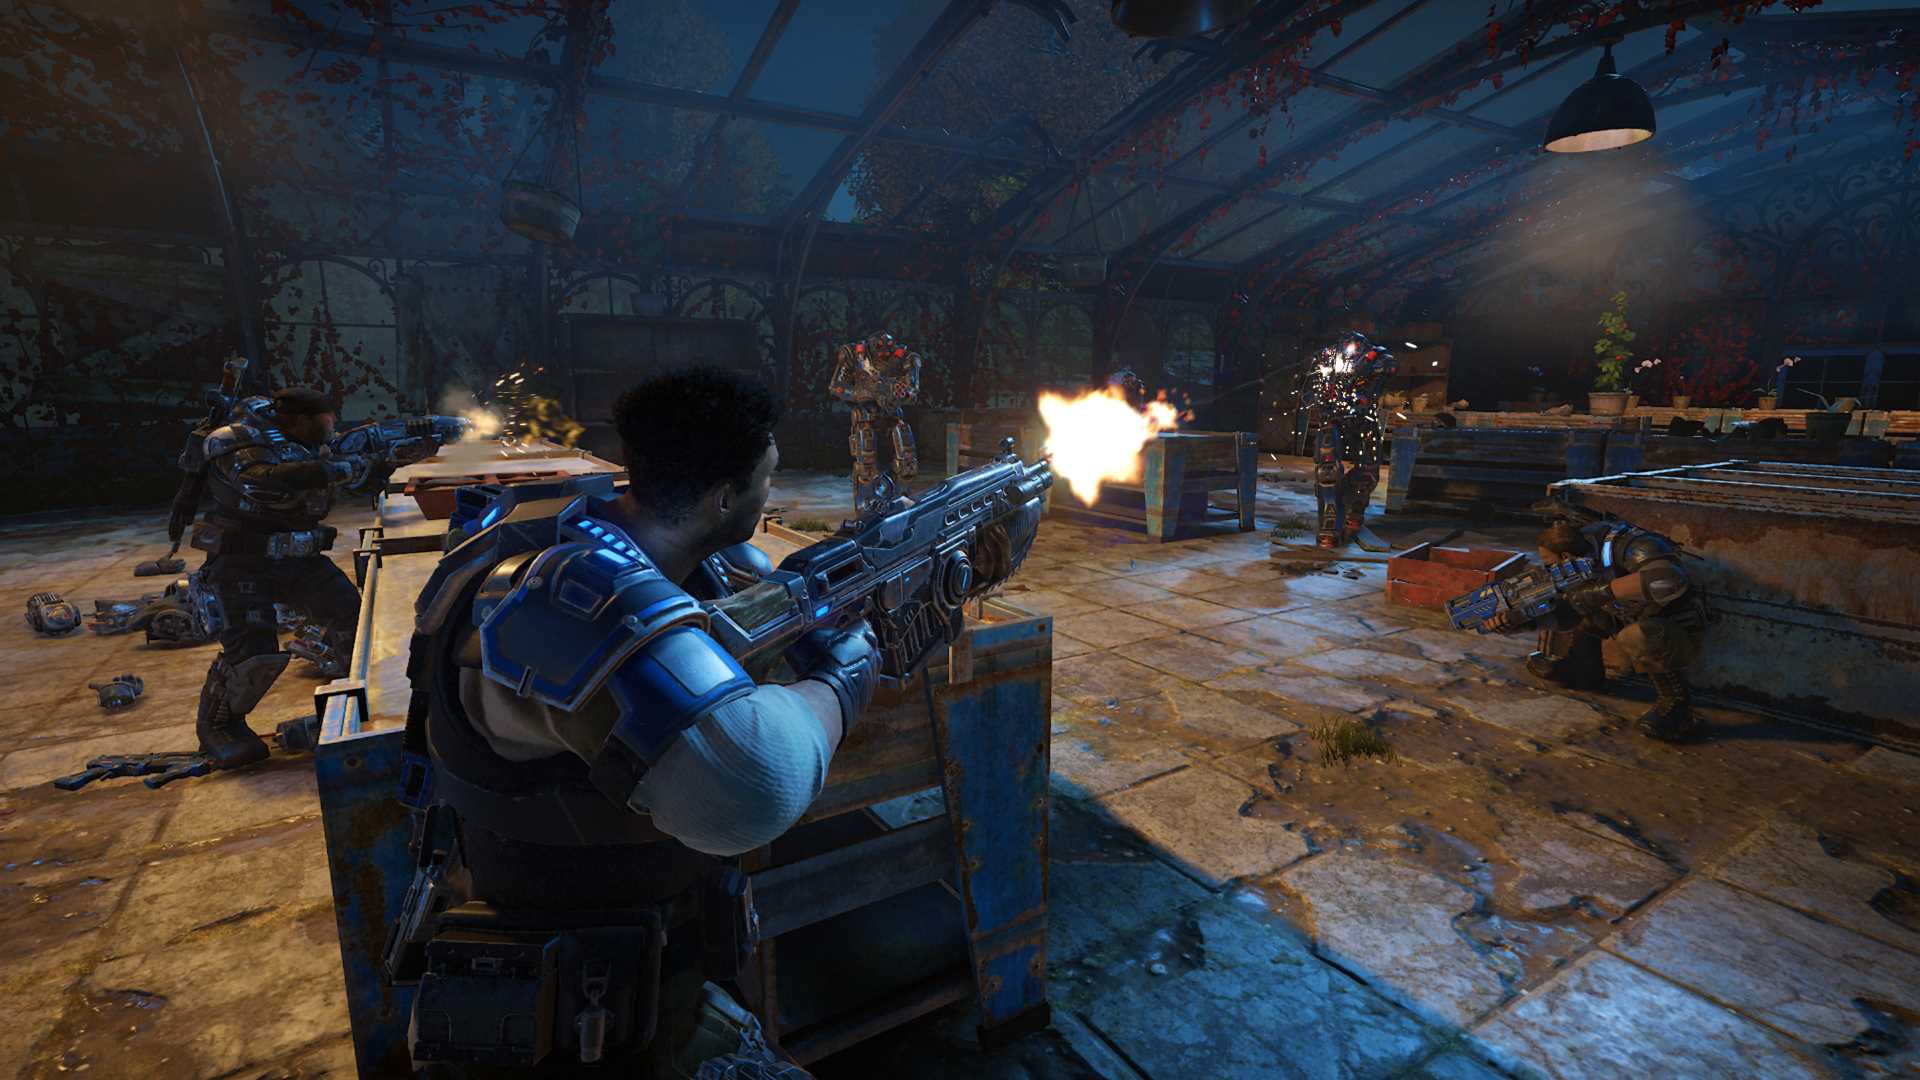 Gears of War 4 Gameplay - 6 Minutes of Gears 4 Gameplay from E3